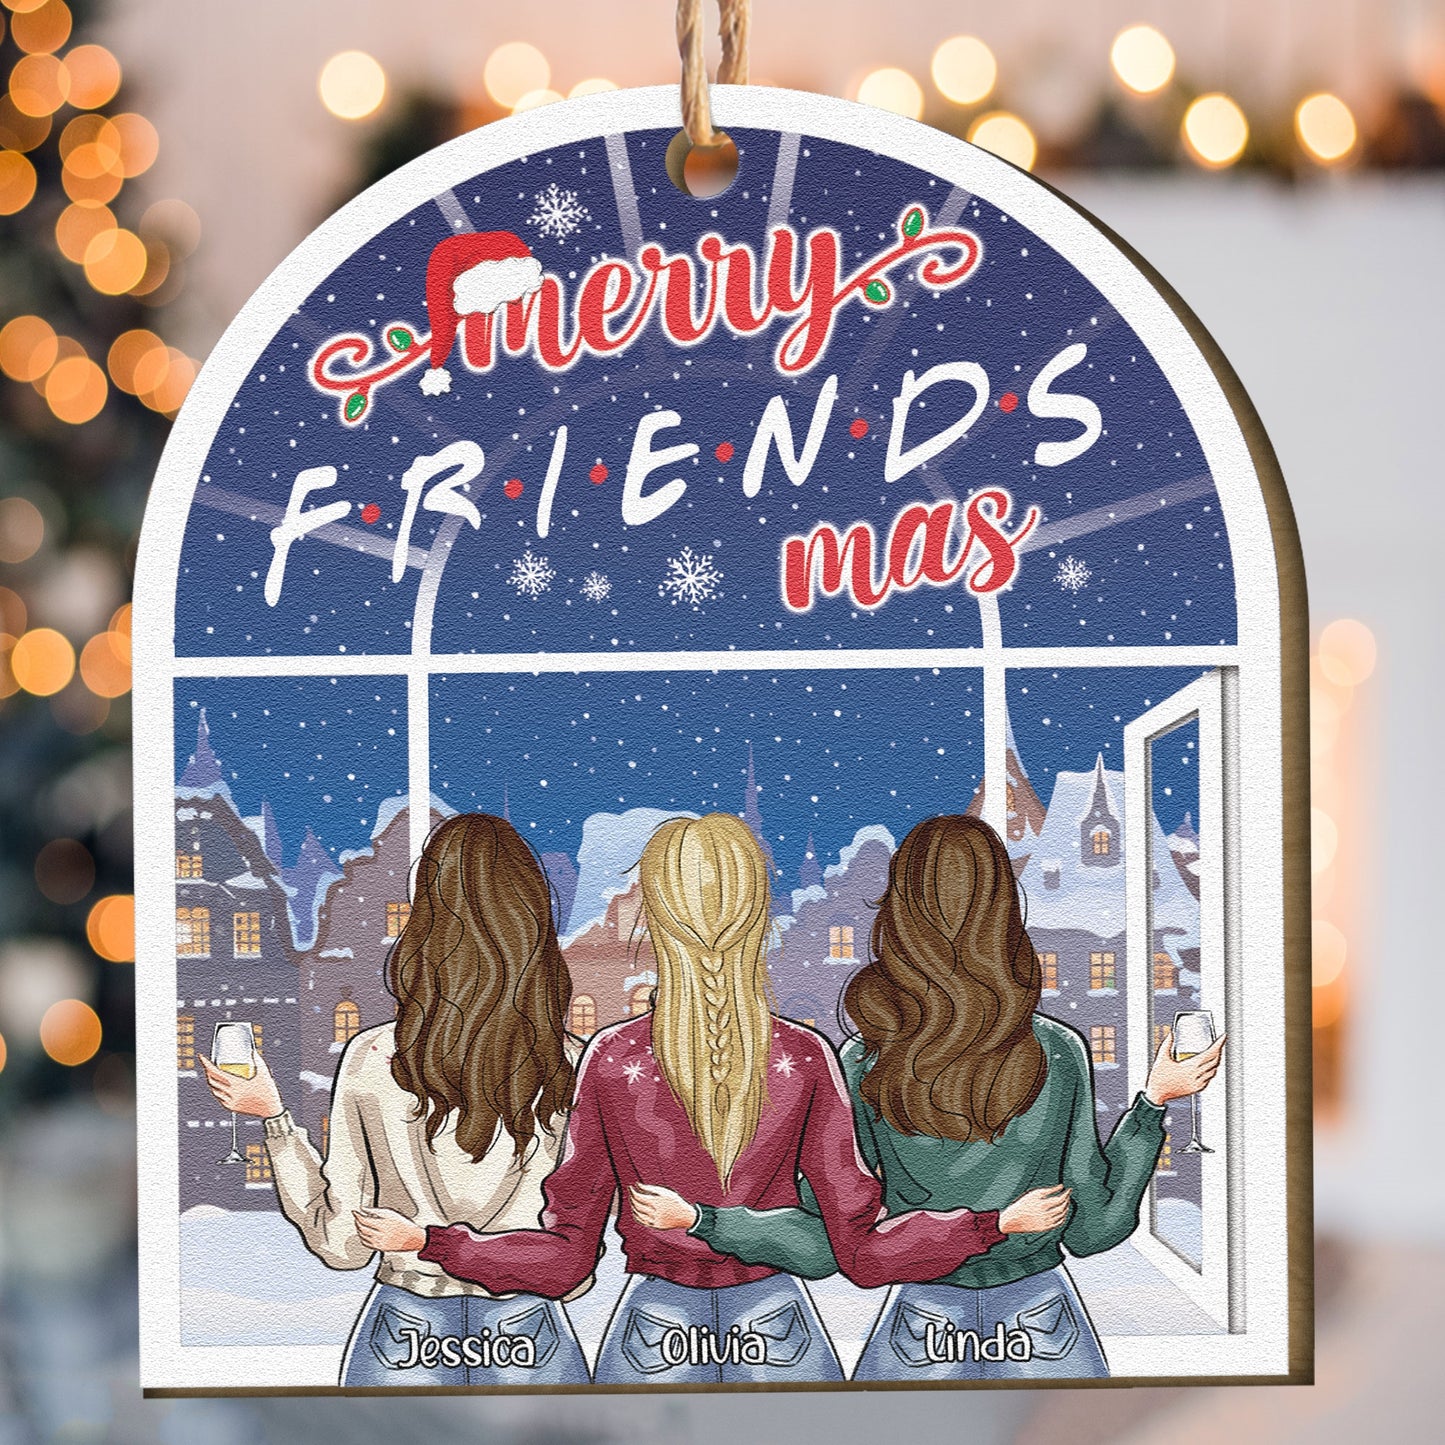 Merry Friendsmas - Personalized Wooden Ornament